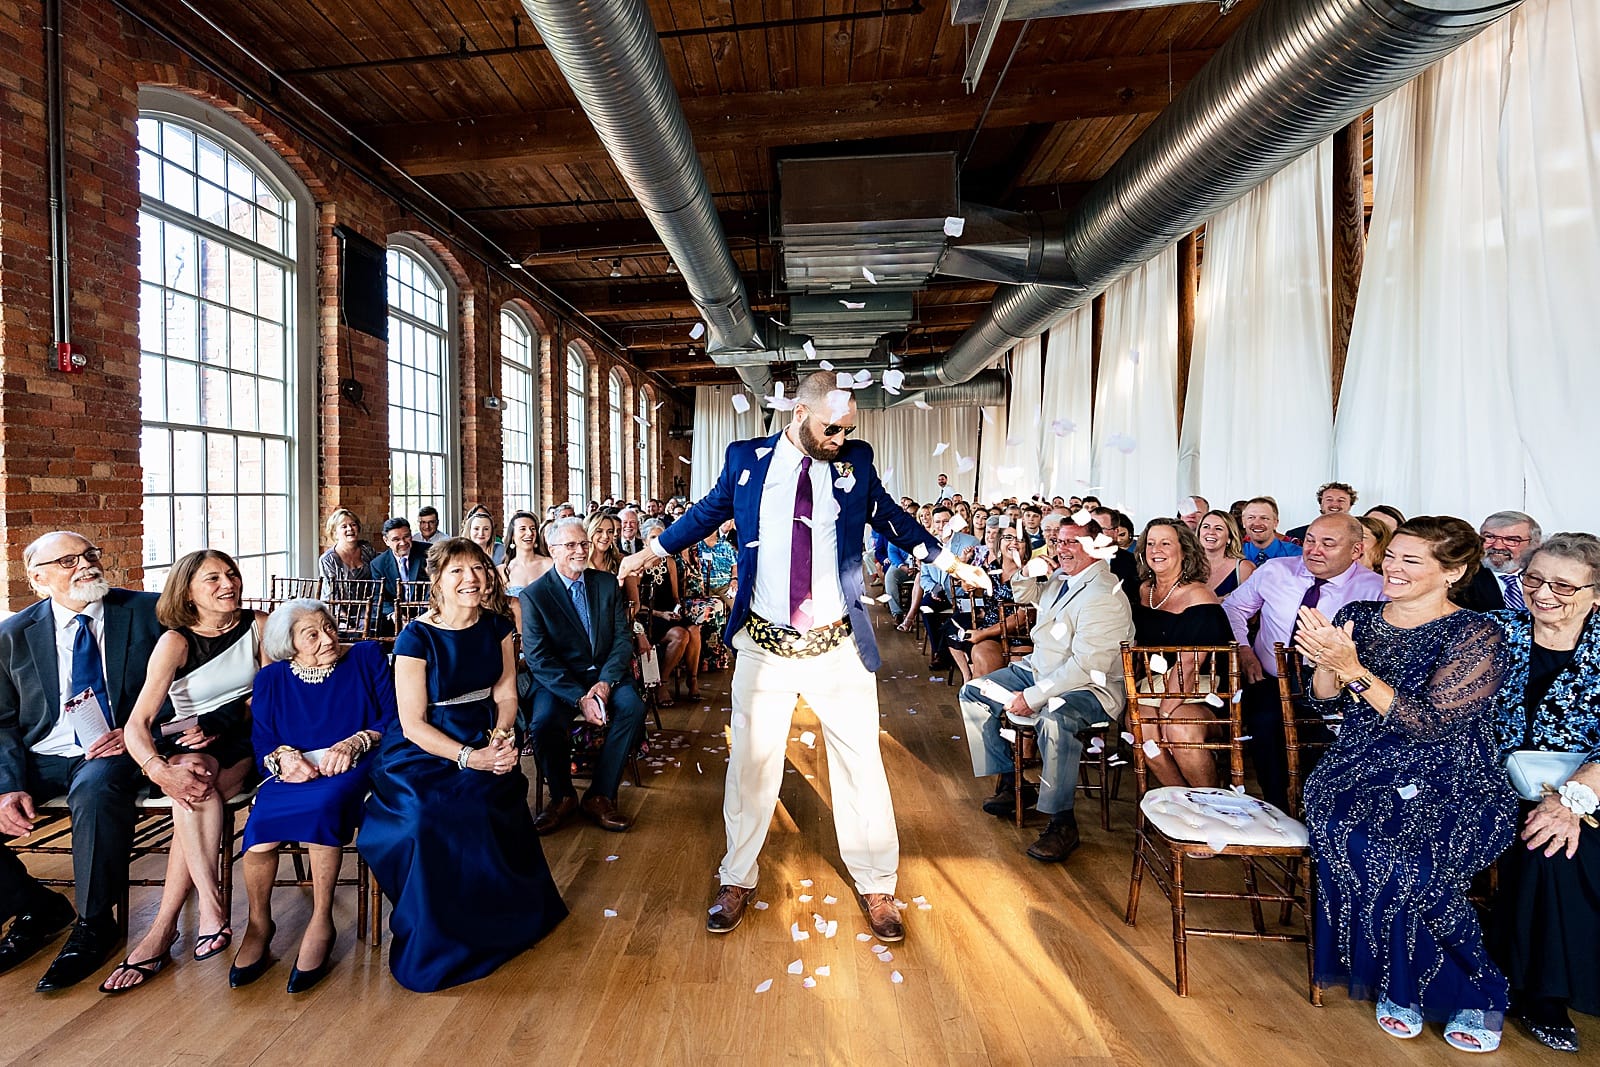 This couple had one of their friends as the "Flower Man". He had a fanny pack full of petals and tossed them very dramatically as he made his way down the aisle. SUCH a fun wedding